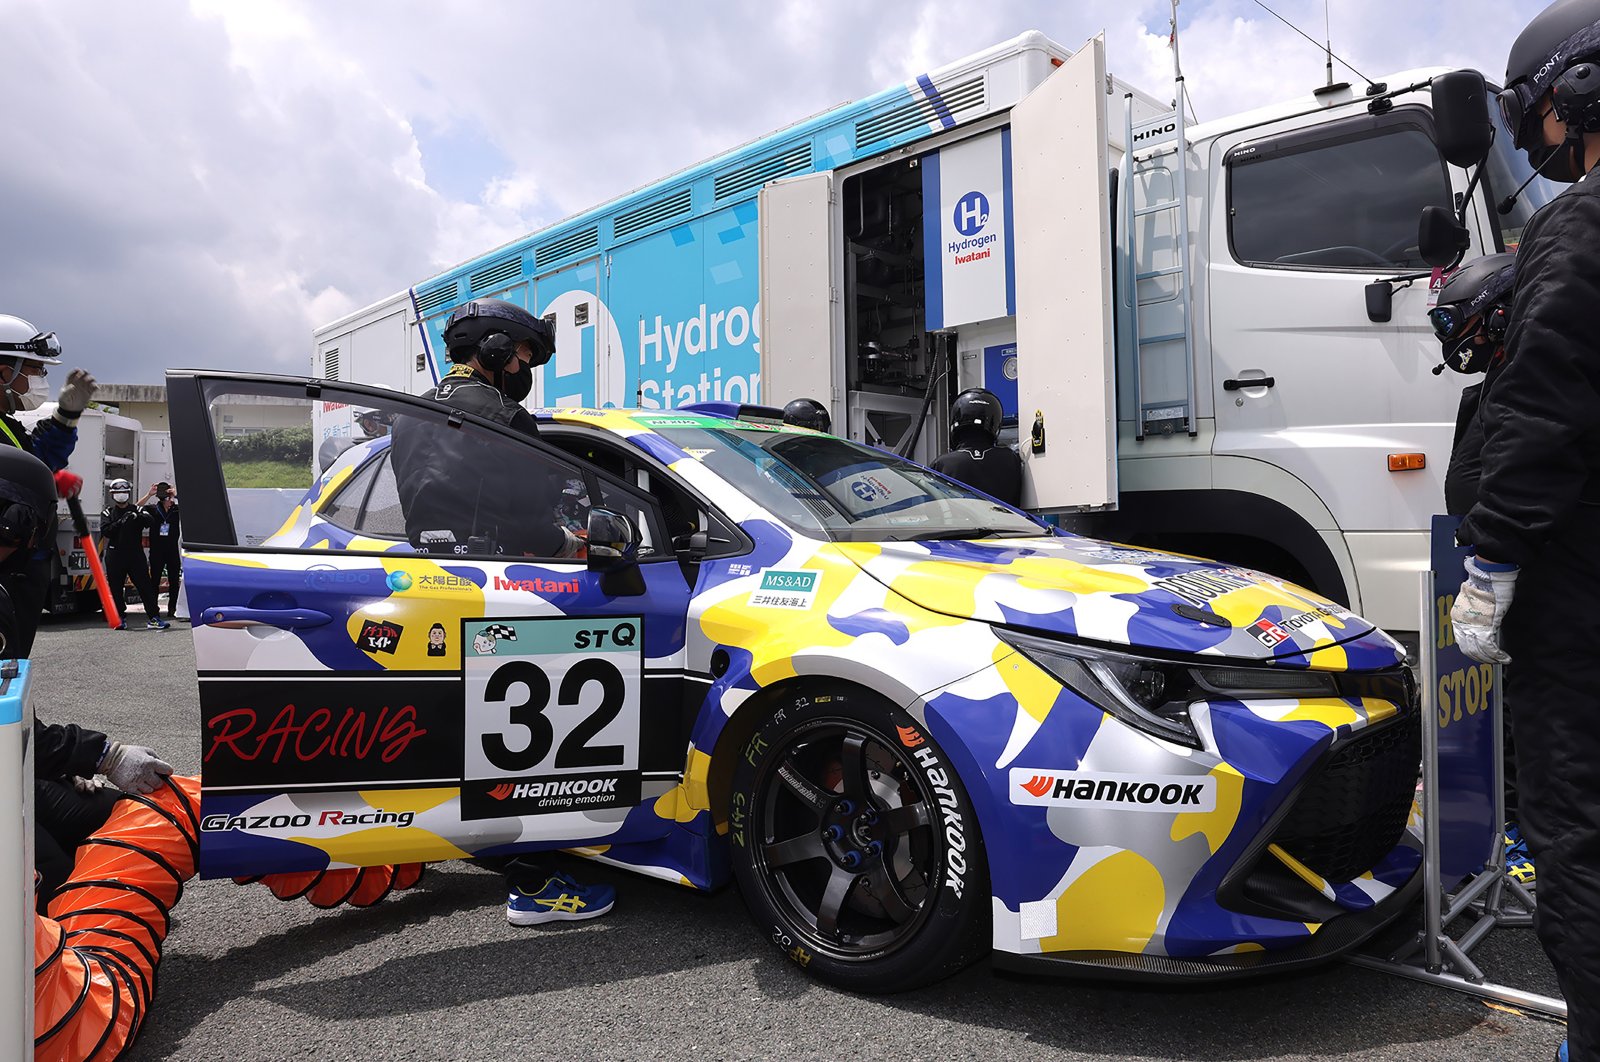 A hydrogen engine car being refueled during the five-hour-long Super Taikyu Race at Autopolis in Hita, Oita prefecture, southern Japan, July 31, 2021. (Photo by Toyota Motor Corp. via AP)